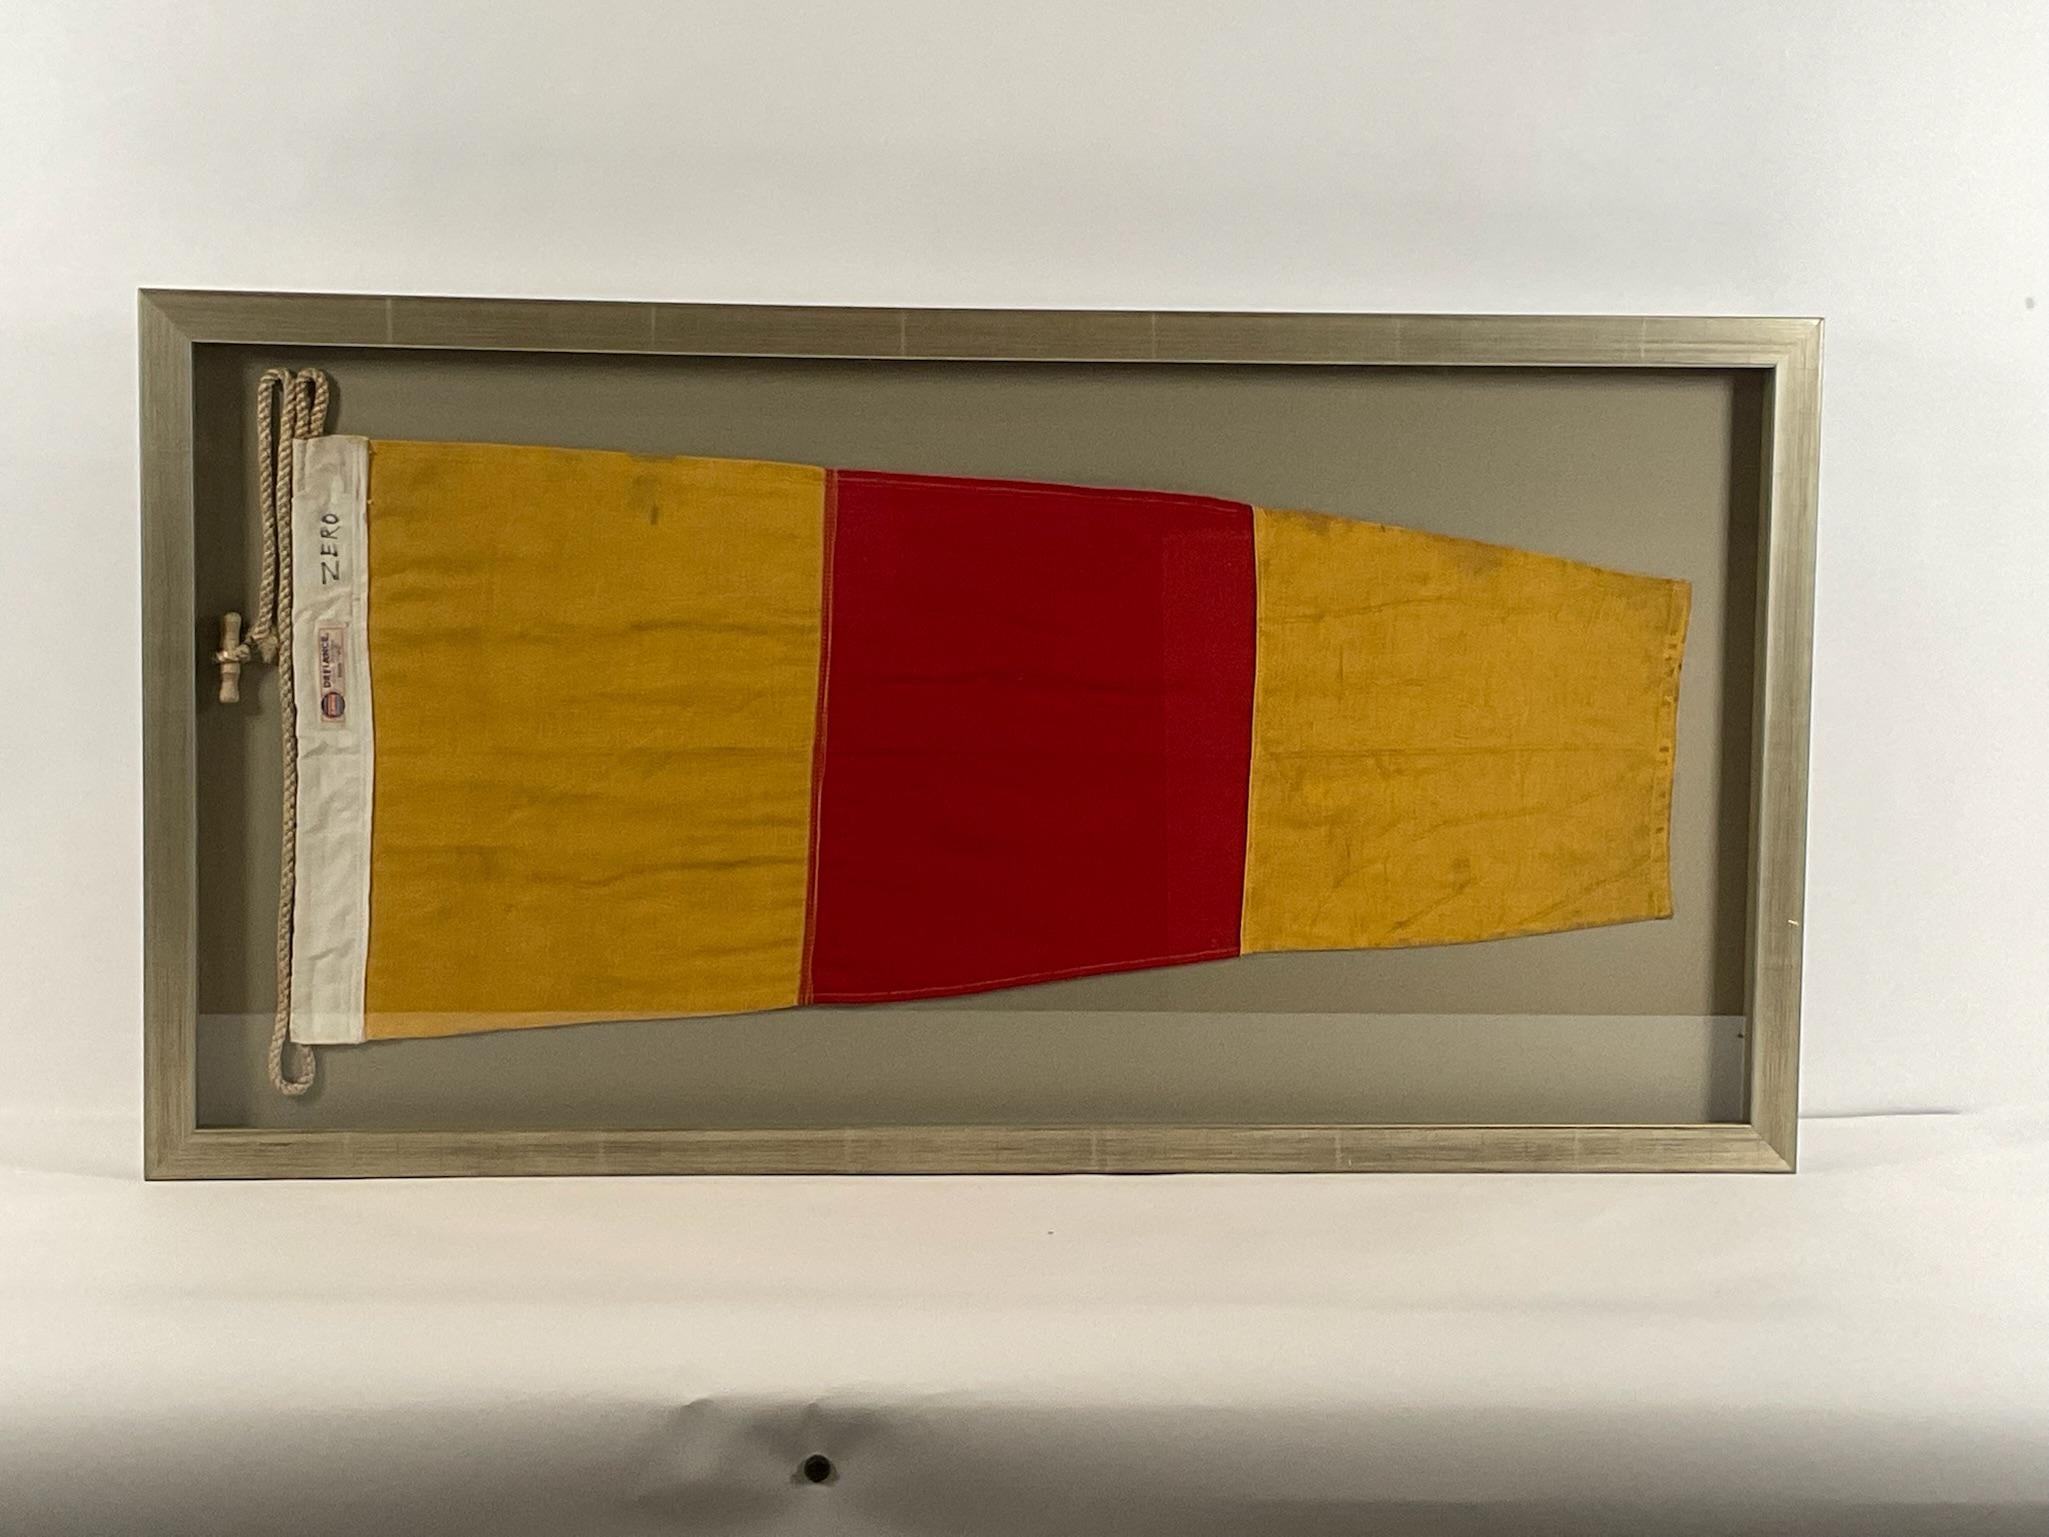 Framed linen signal flag fitted to a shadow box frame. This nautical flag represents the numeral ZERO. With makers label from Annin Flag Company. Stitched in panels of yellow and red. Heavy canvas hoist with rope and toggle.

Weight: 13 lbs.
Overall